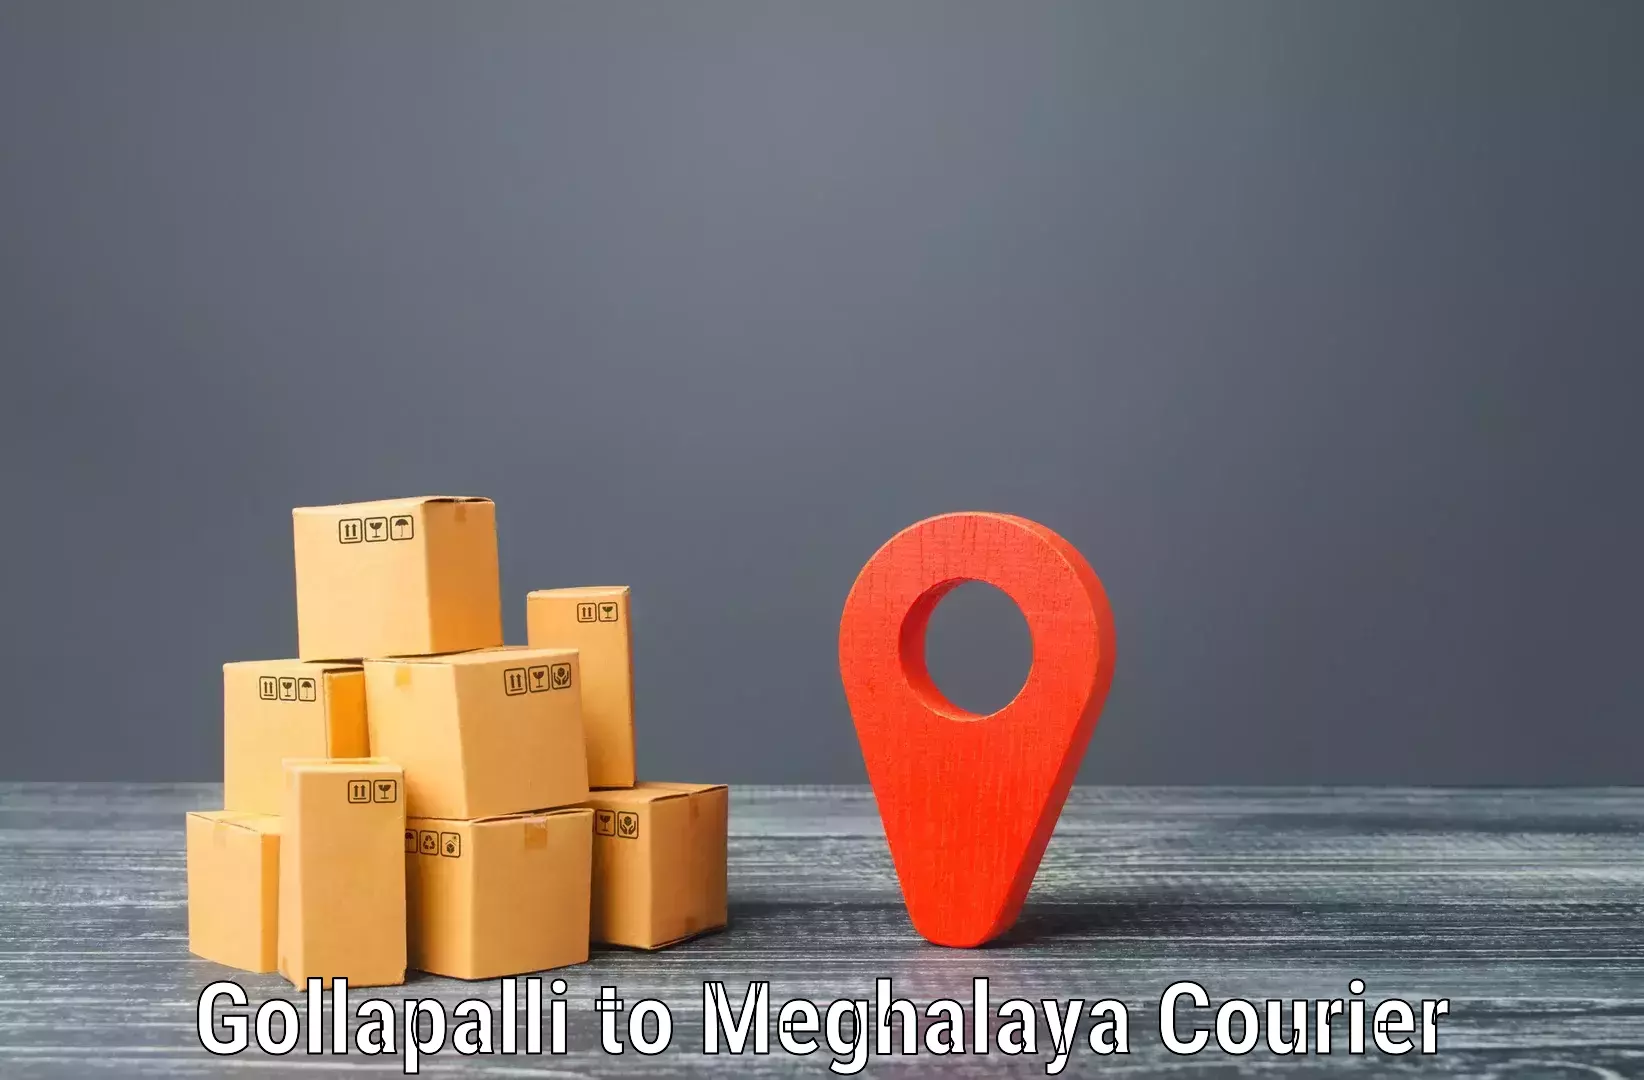 Business delivery service Gollapalli to Rongjeng